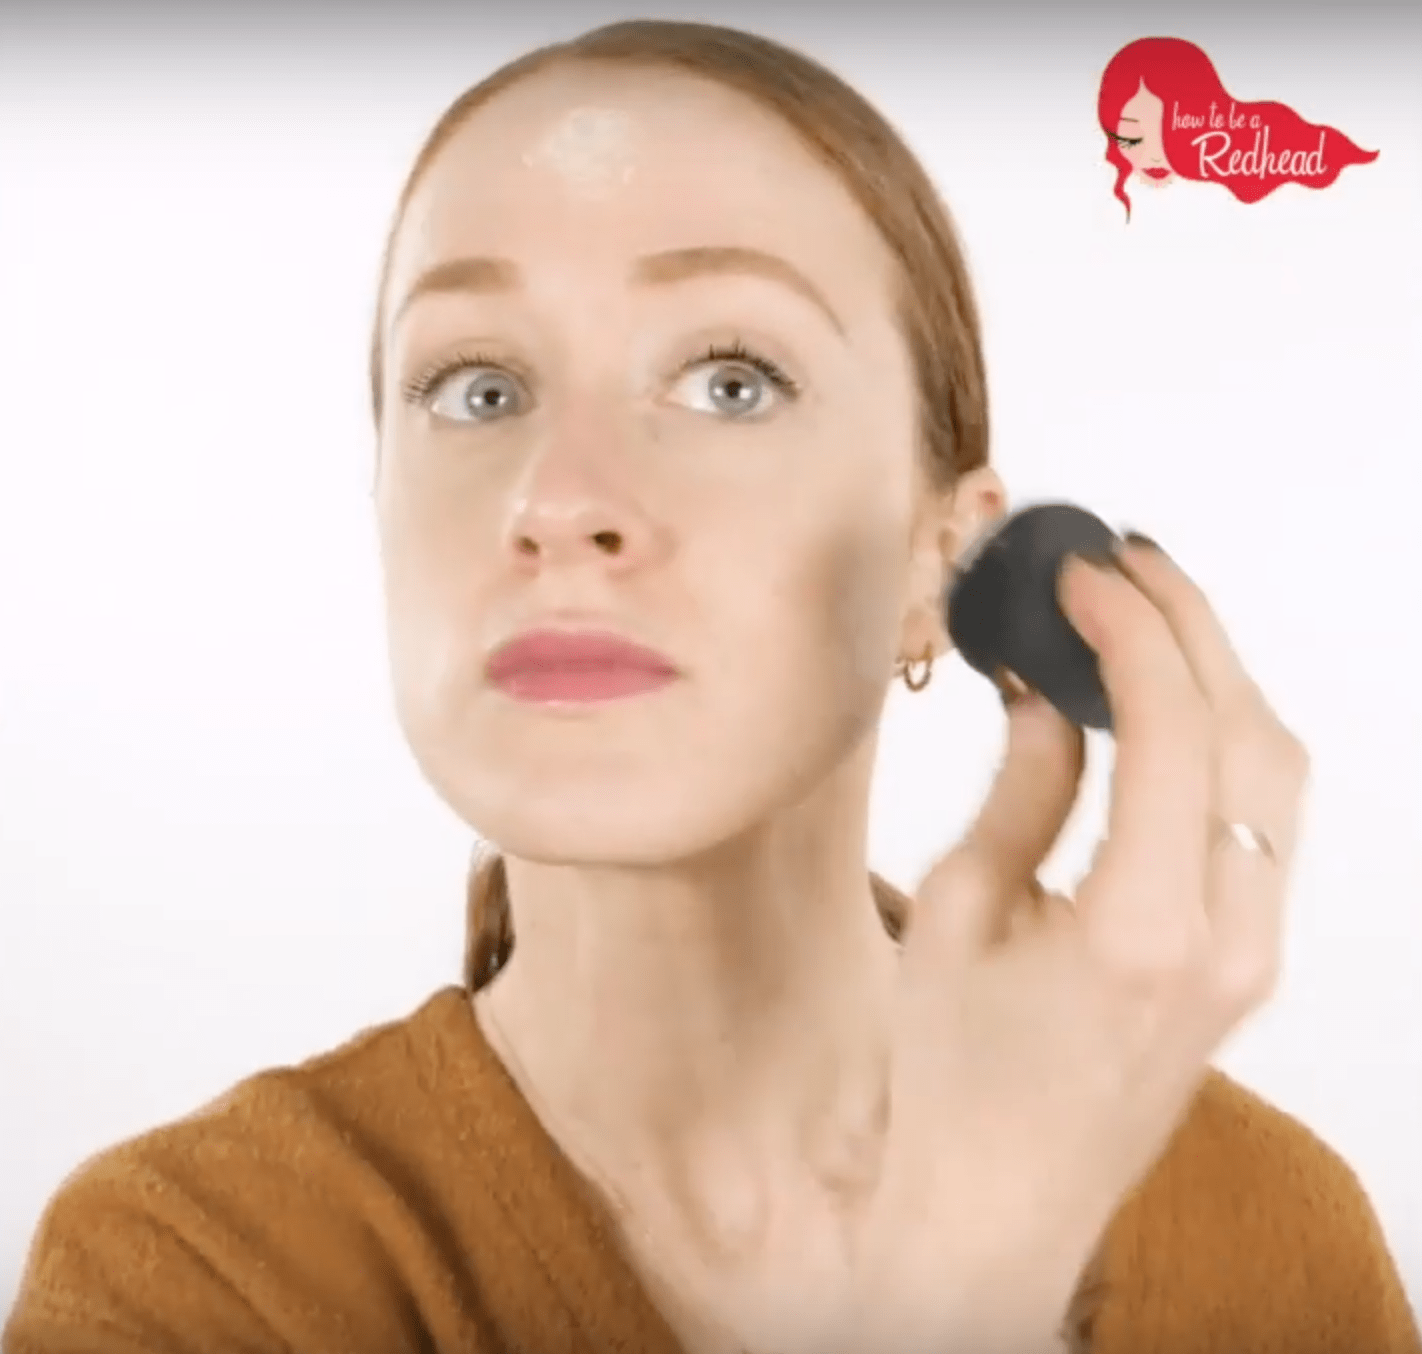 How to Properly Apply Setting Powder to Redhead Skin